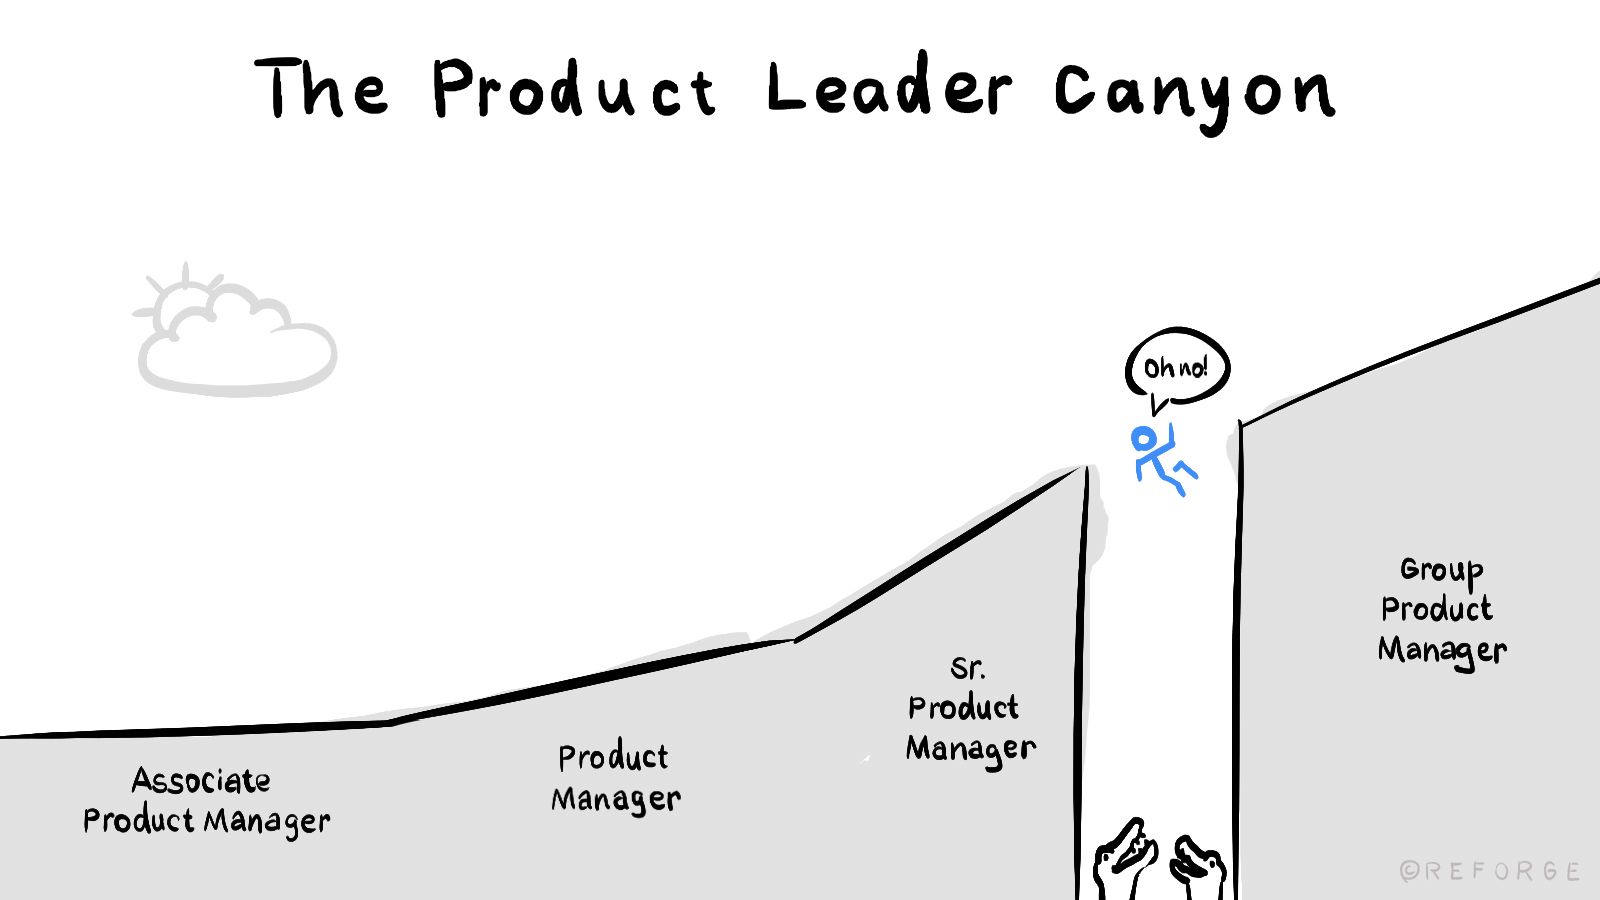 A product manager cultivating a growth mindset to become a product leader